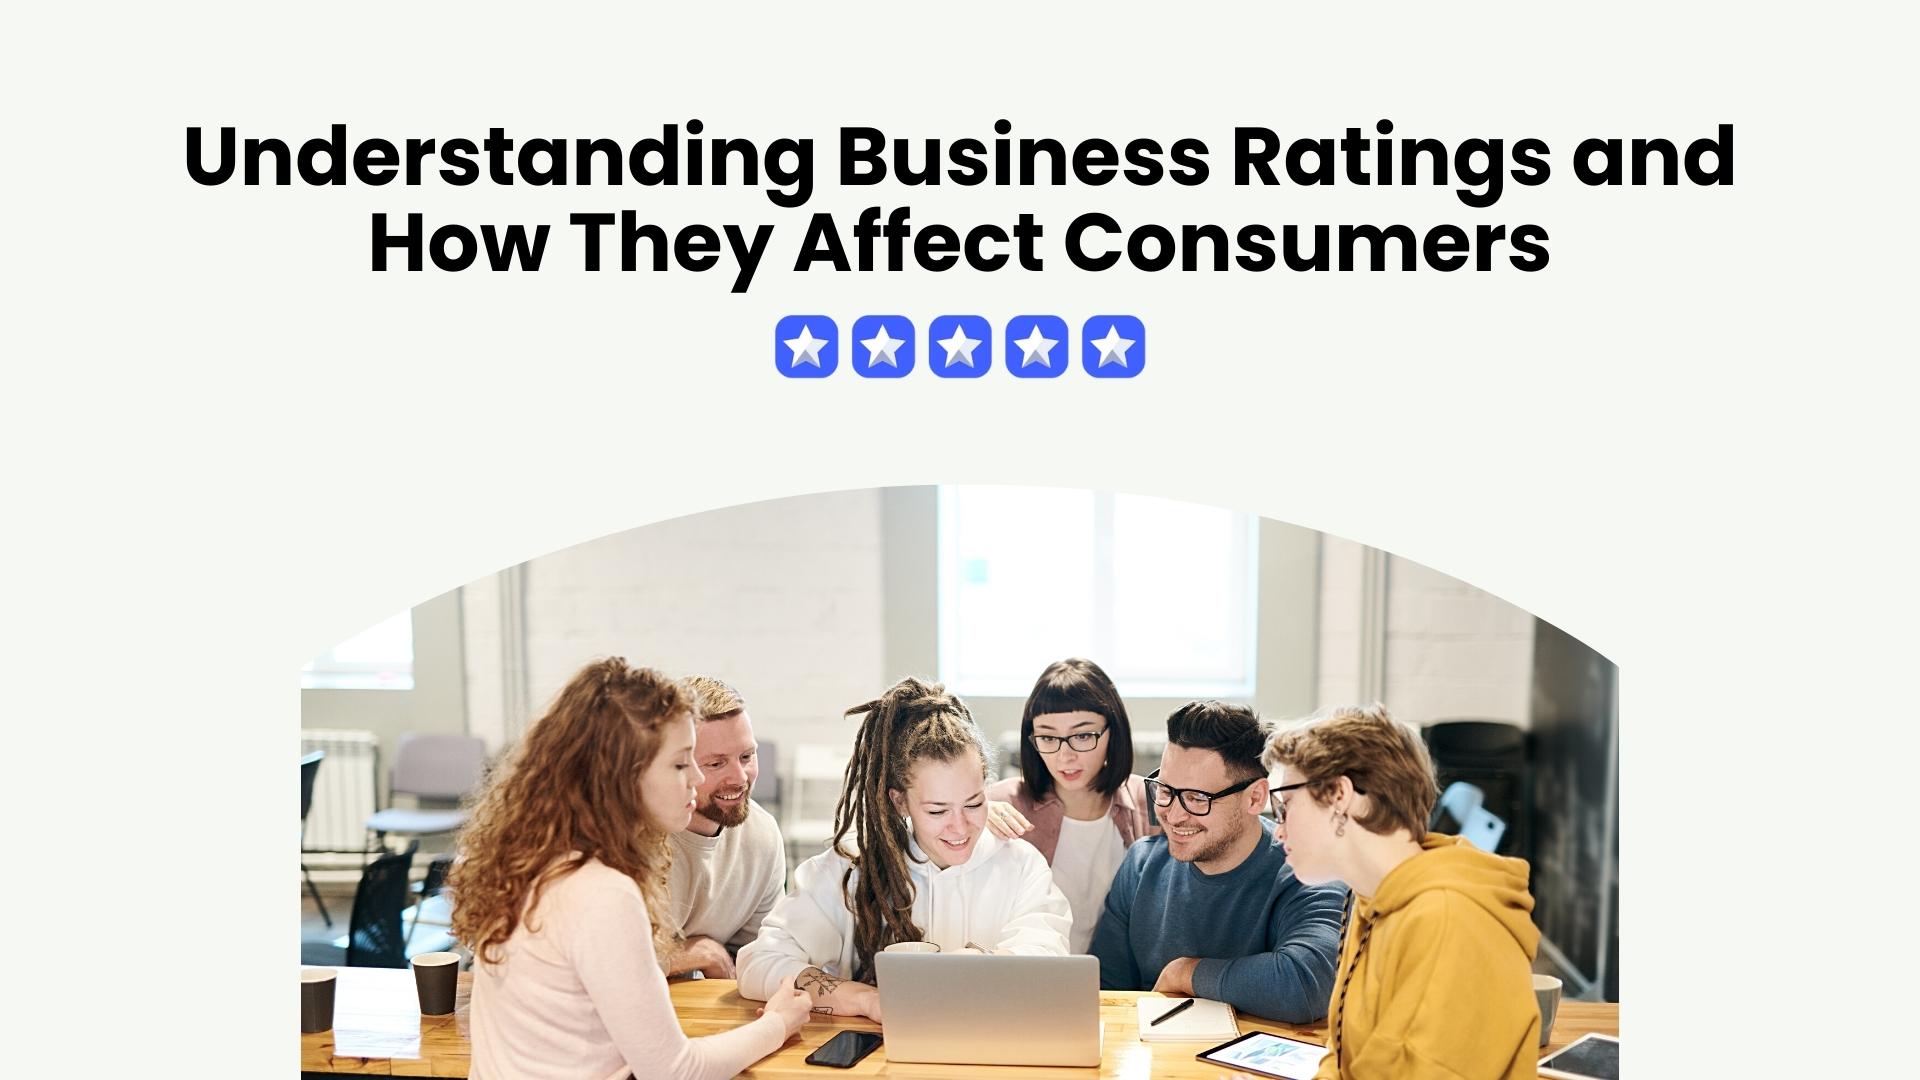 Business Ratings and Their Impact on Consumers